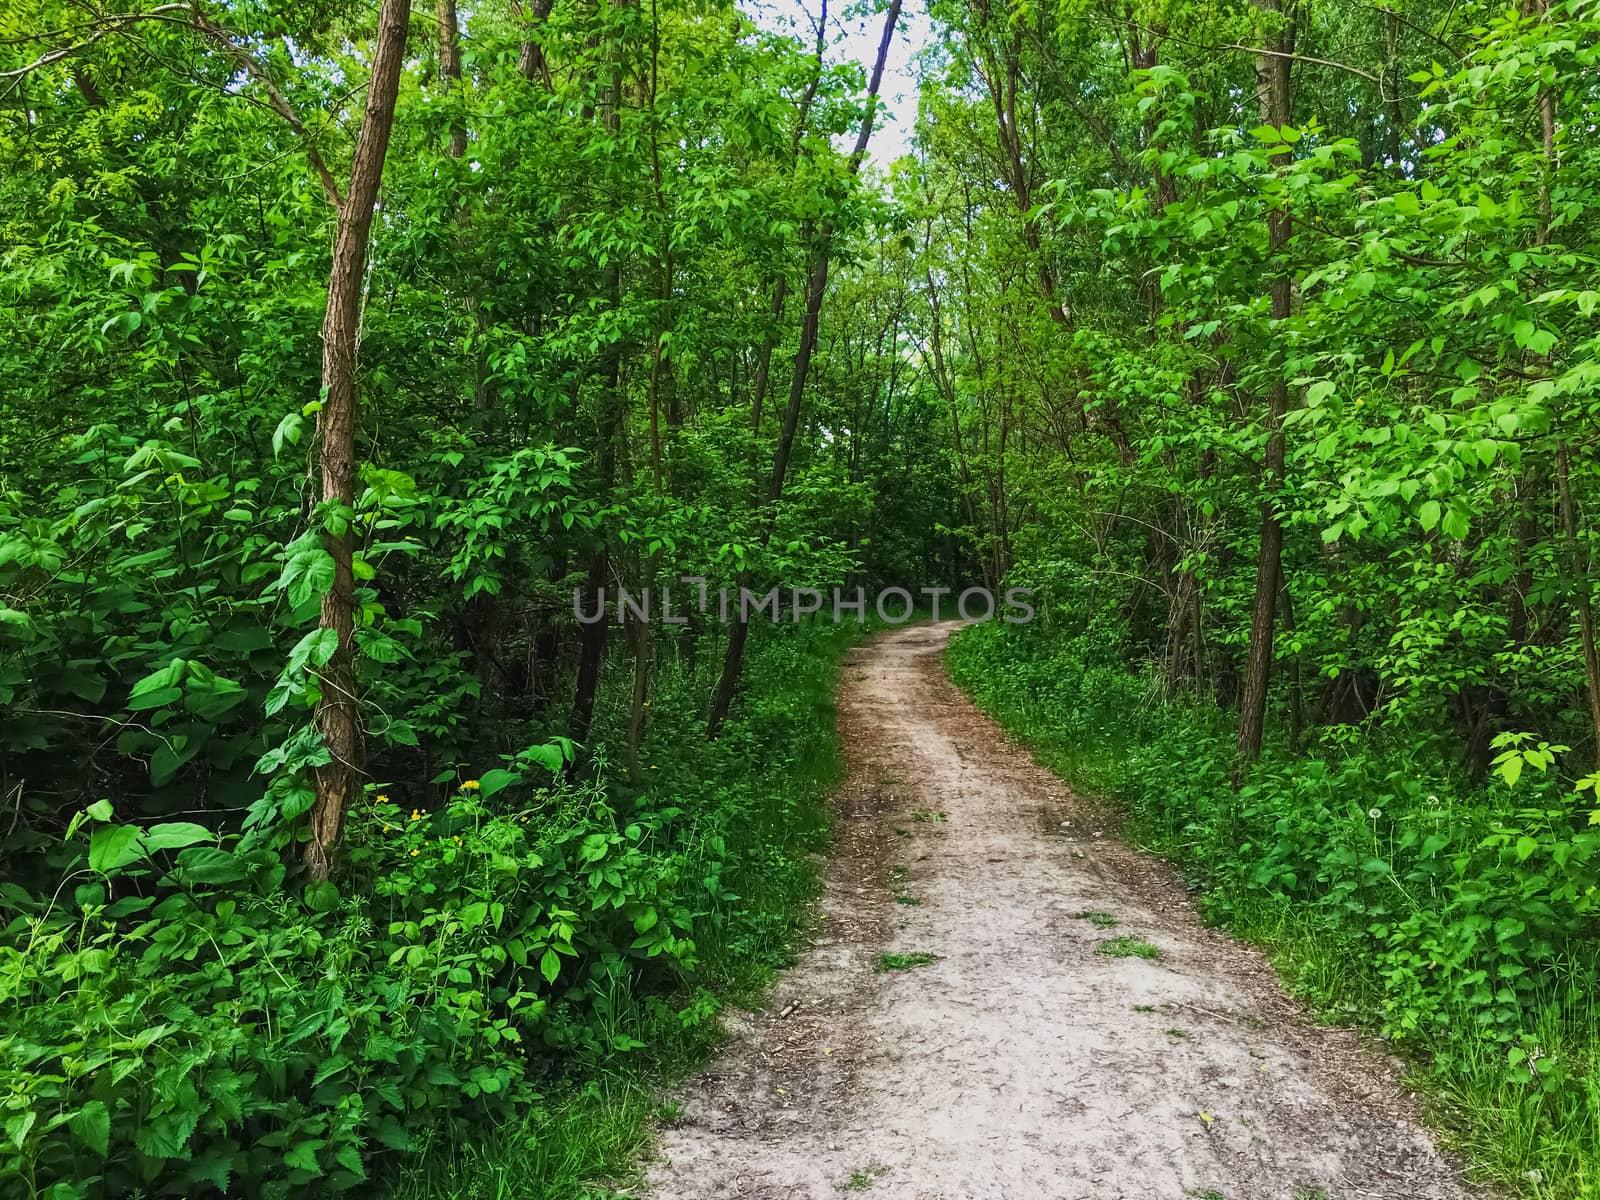 Countryside woods as rural landscape, amazing trees in green forest, nature and environment scenery